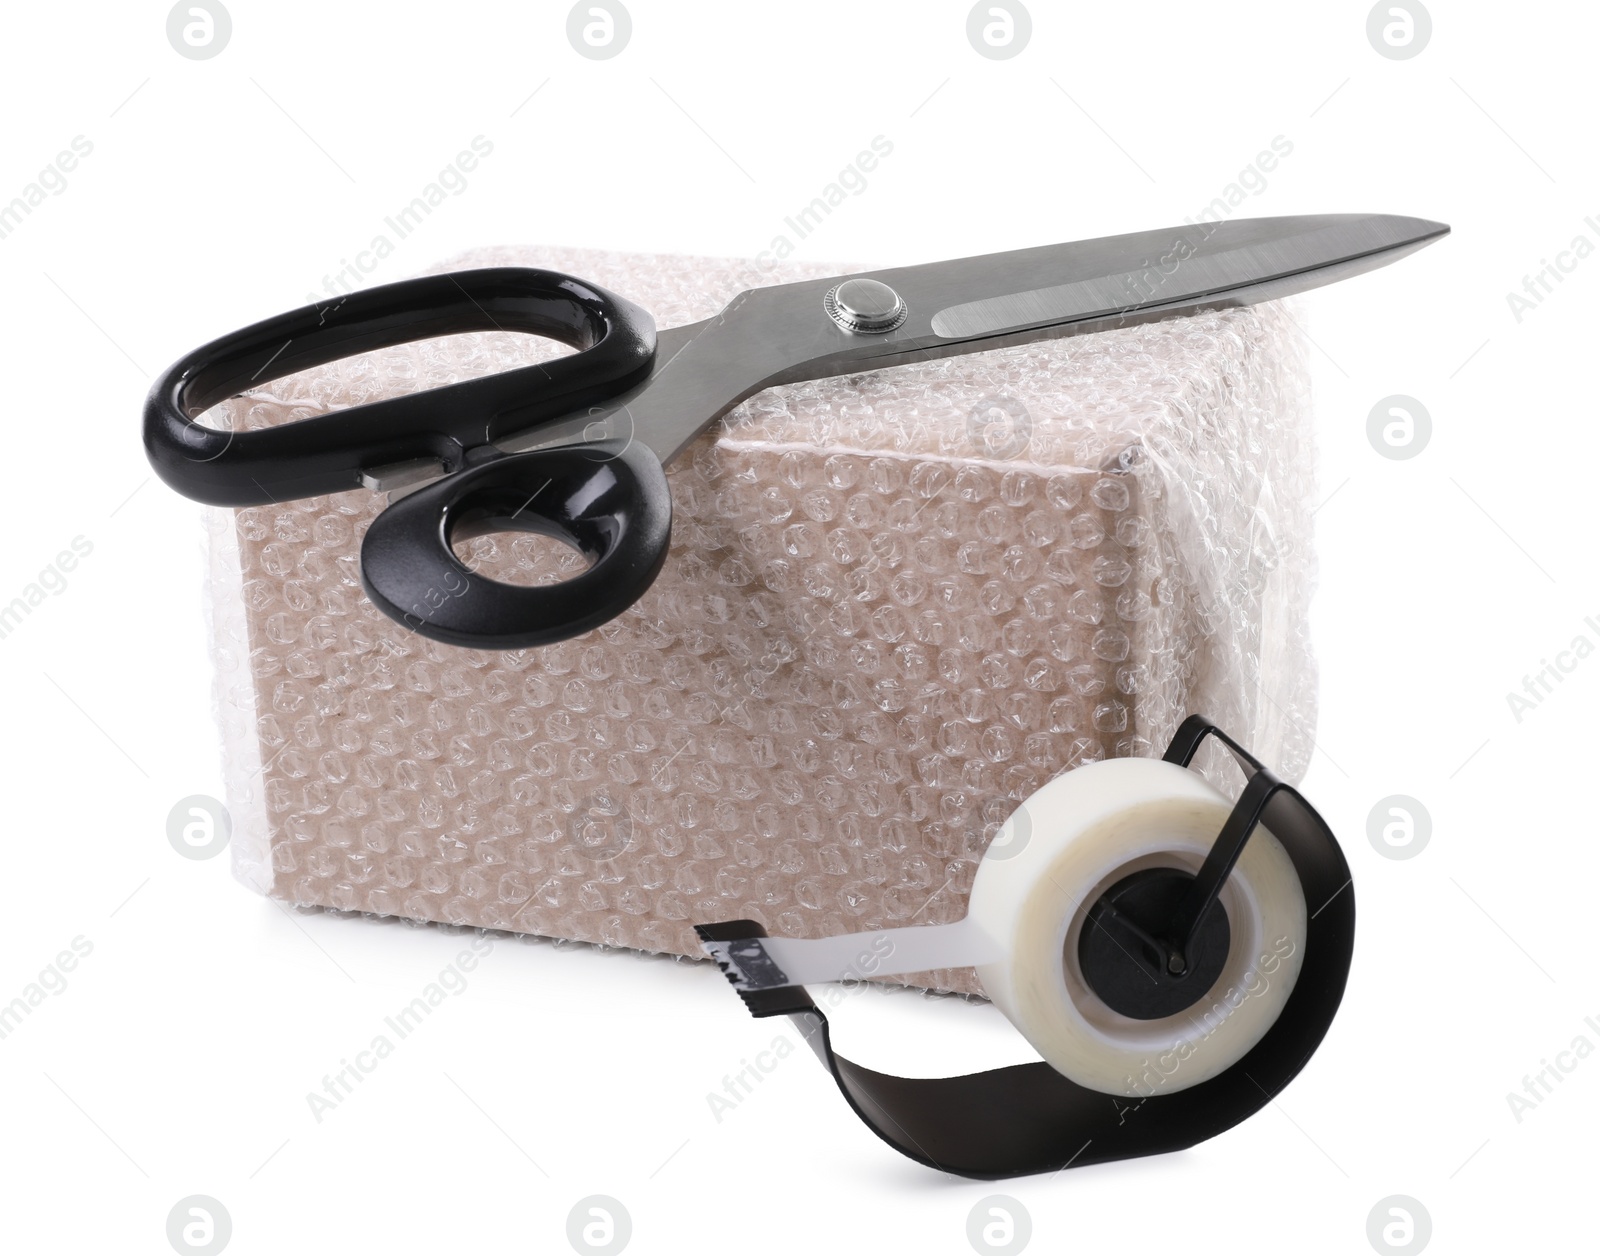 Photo of Cardboard box packed in bubble wrap, scissors and adhesive tape on white background